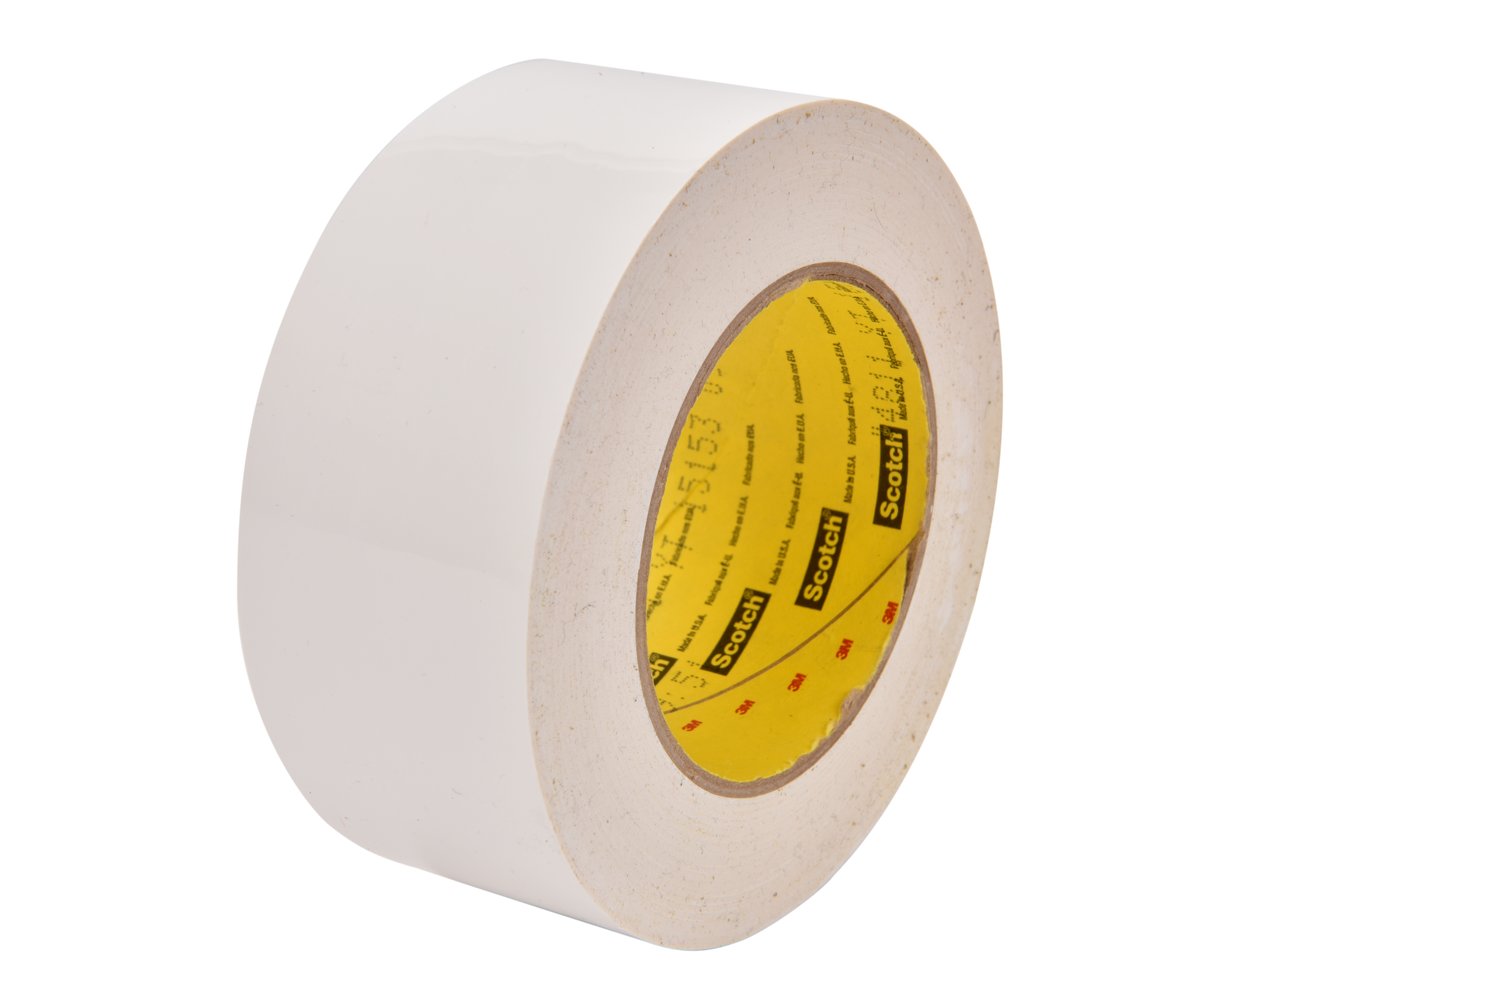 7000029022 - 3M Preservation Sealing Tape 4811, White, 6 in x 36 yd, 9.5 mil, 8
rolls per case